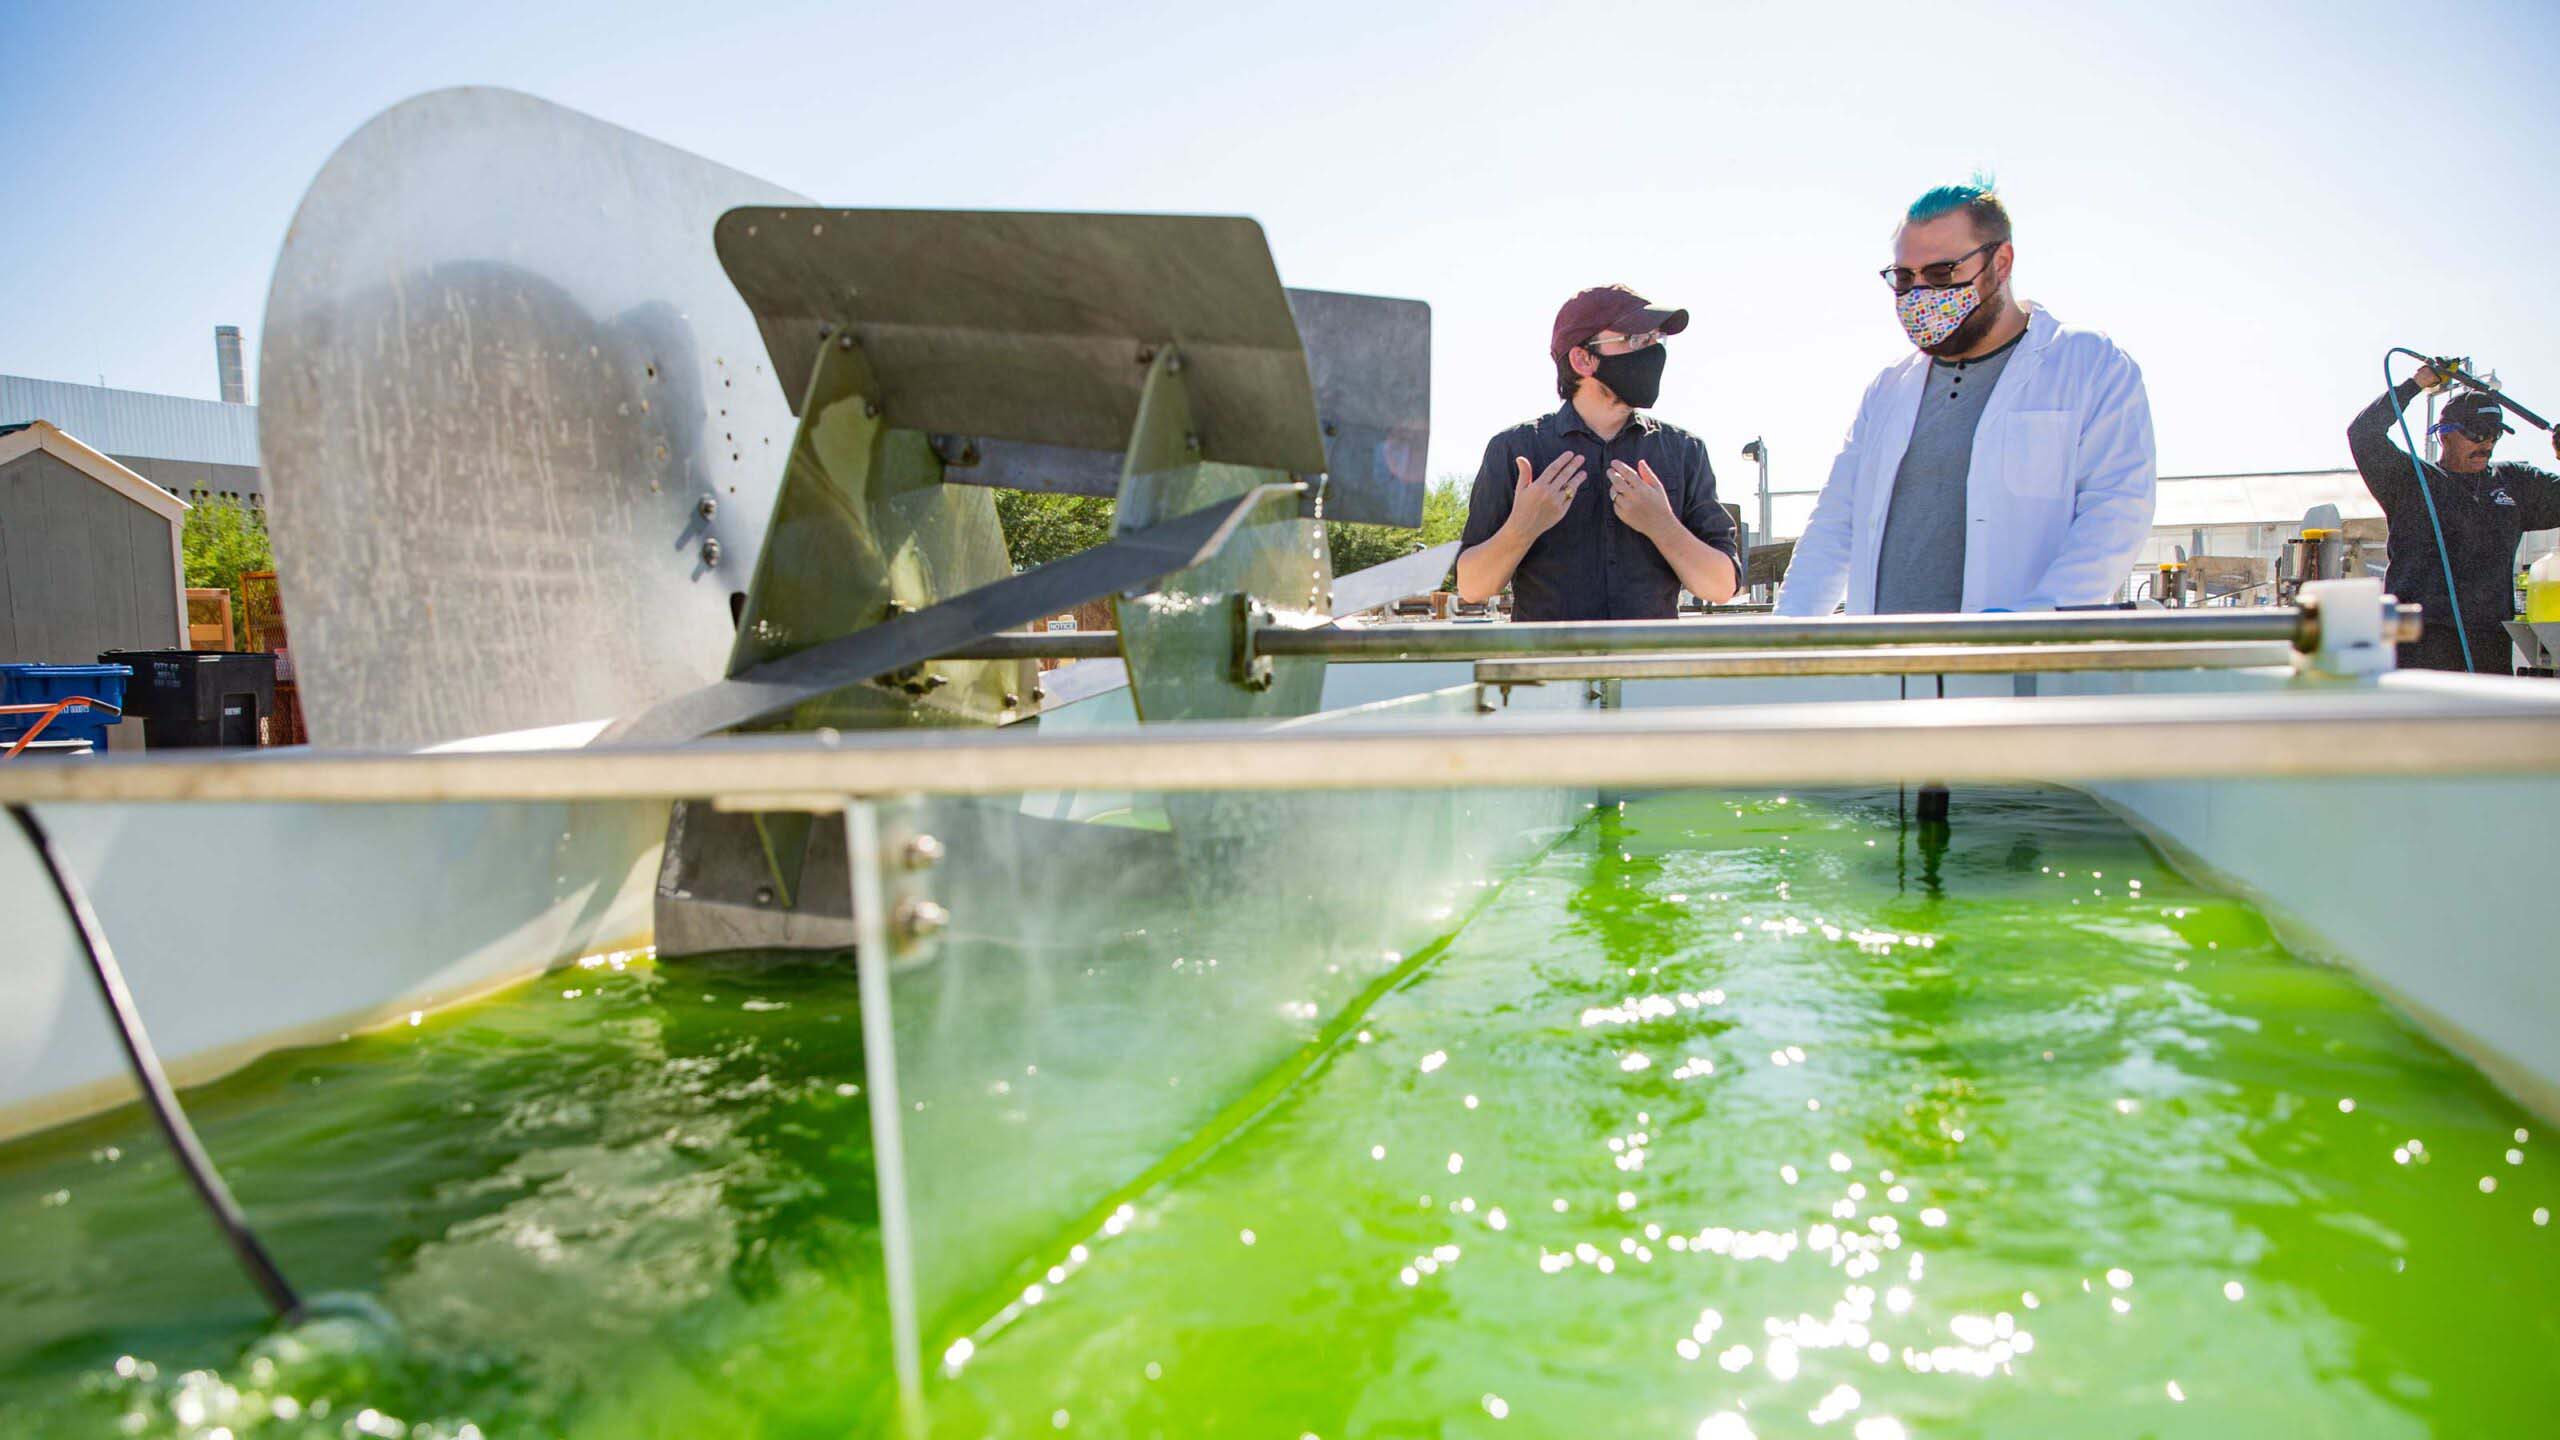 Taylor Weiss and Duane Barbano stand outside in the bright Arizona sun next to a gigantic vat of churning water full of bright green algae